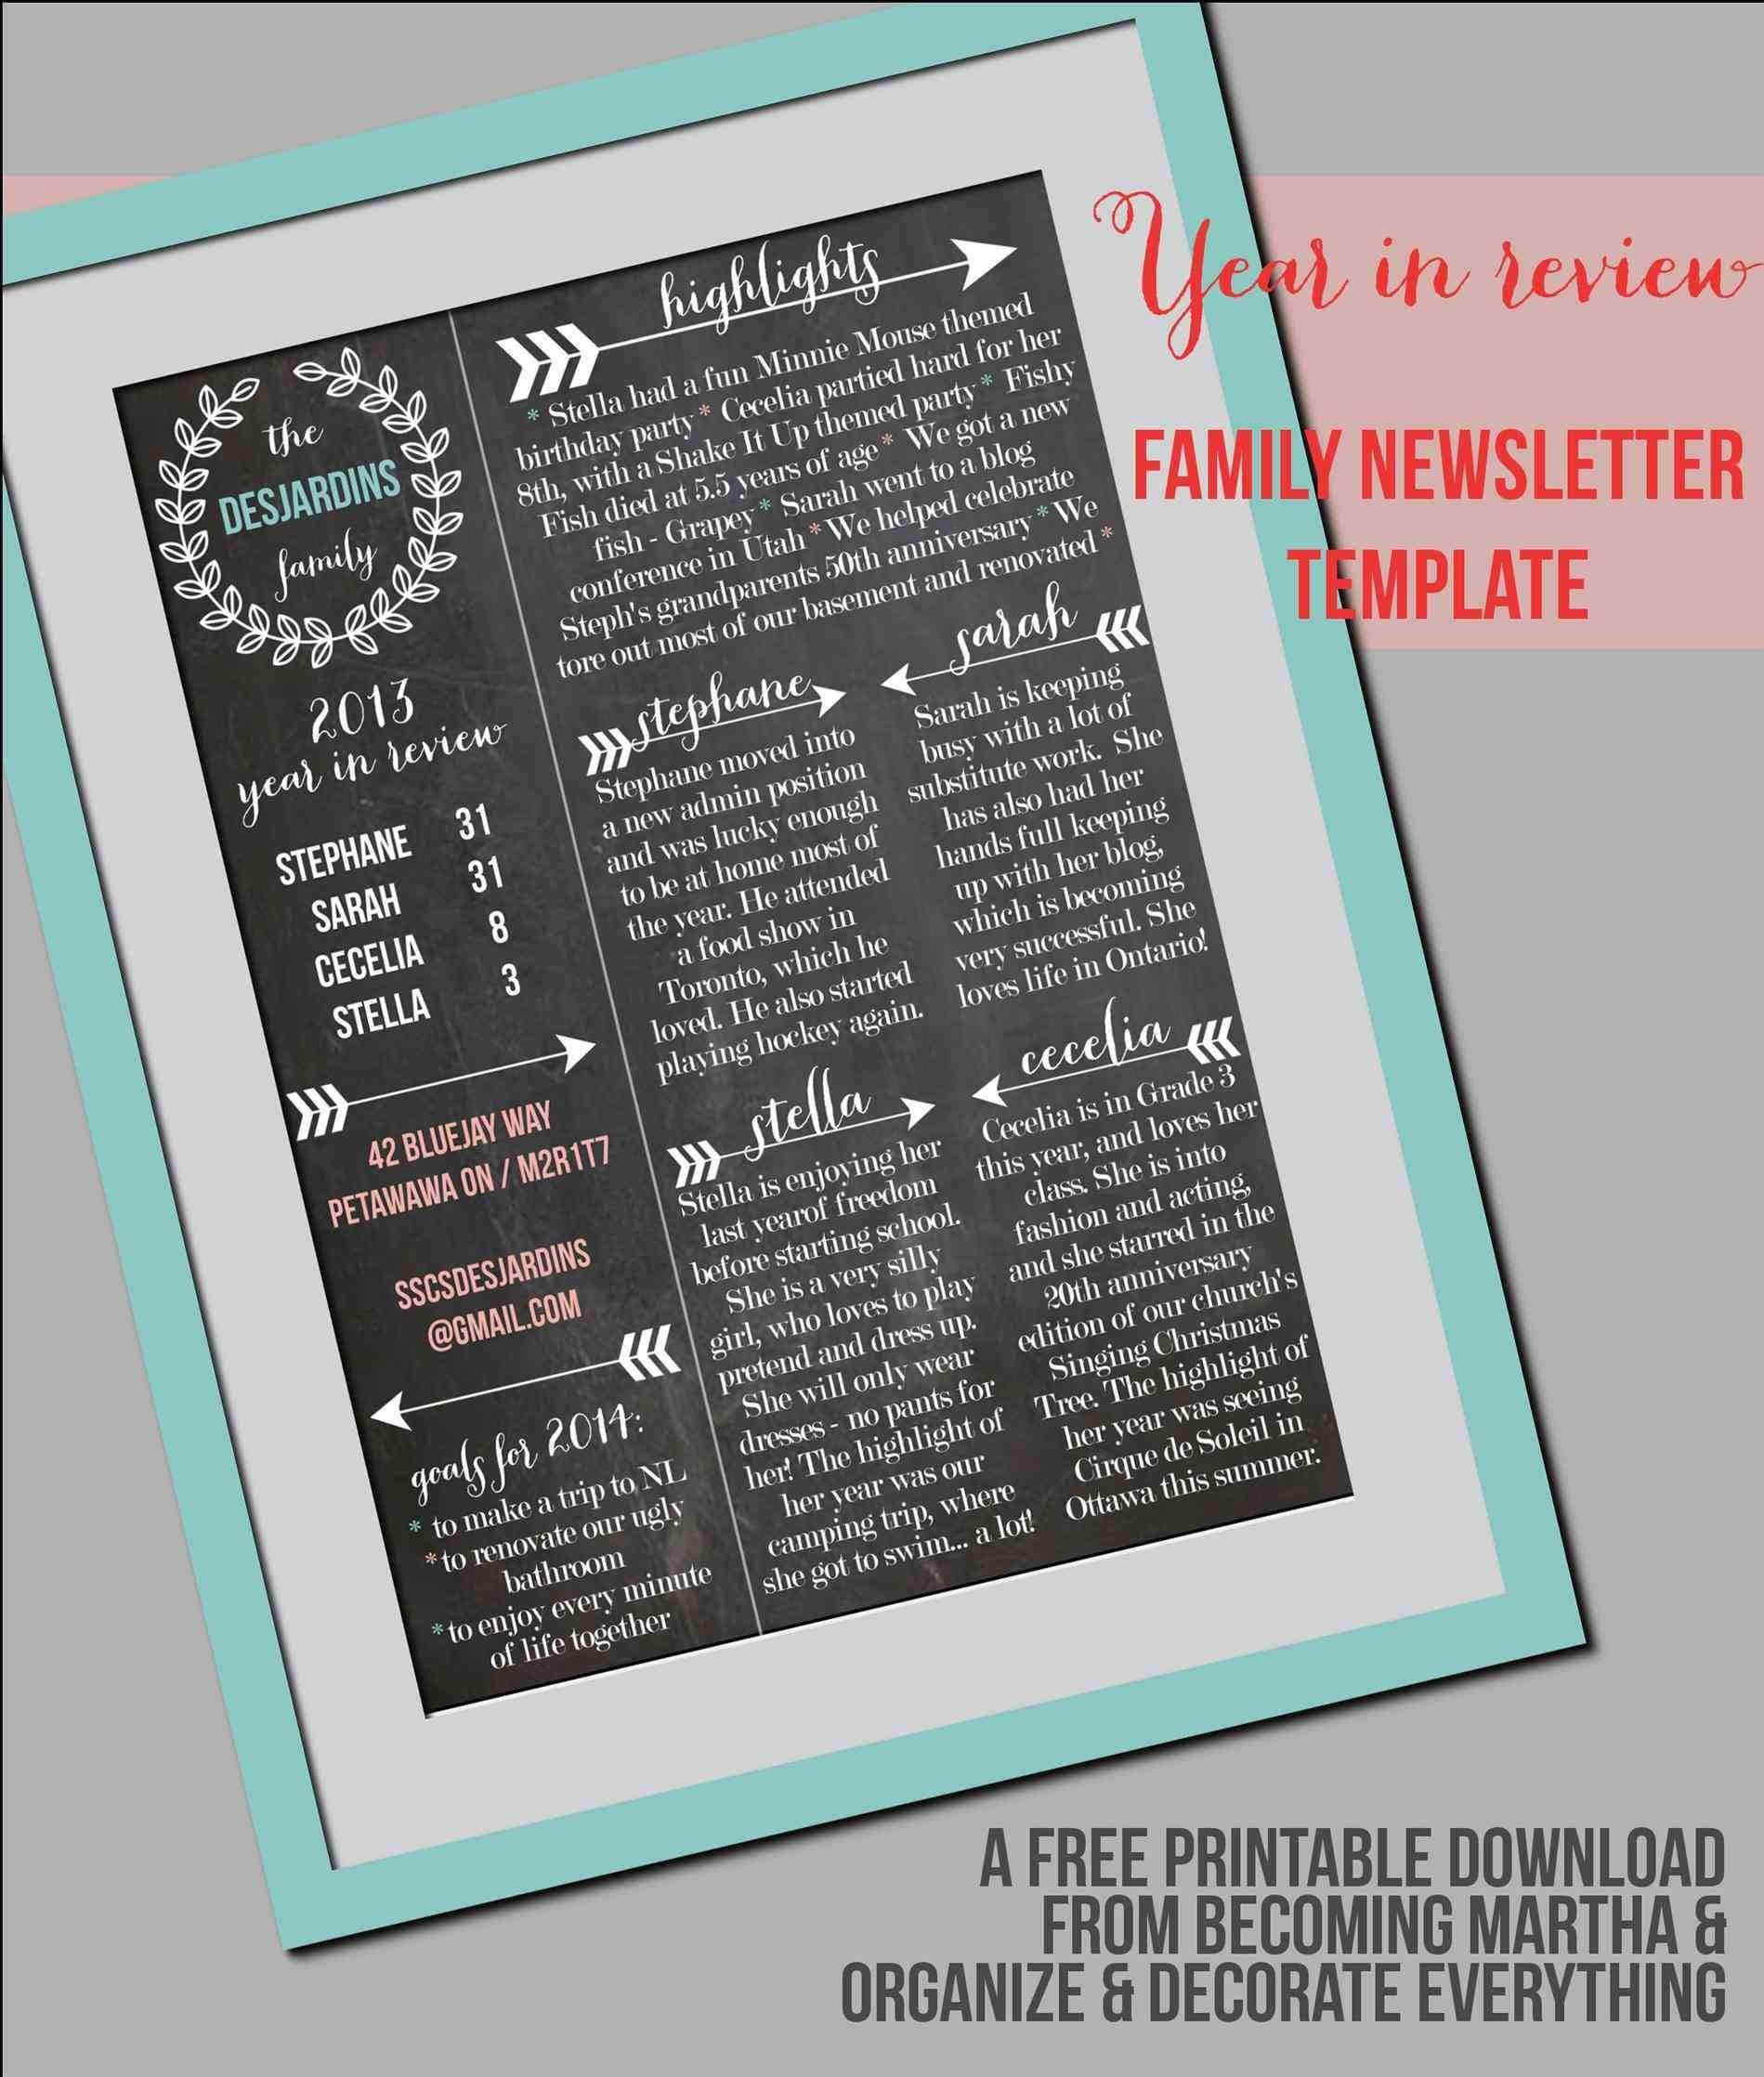 Mouse Party Worksheet together with Elegant Newspaper Obituaries Template